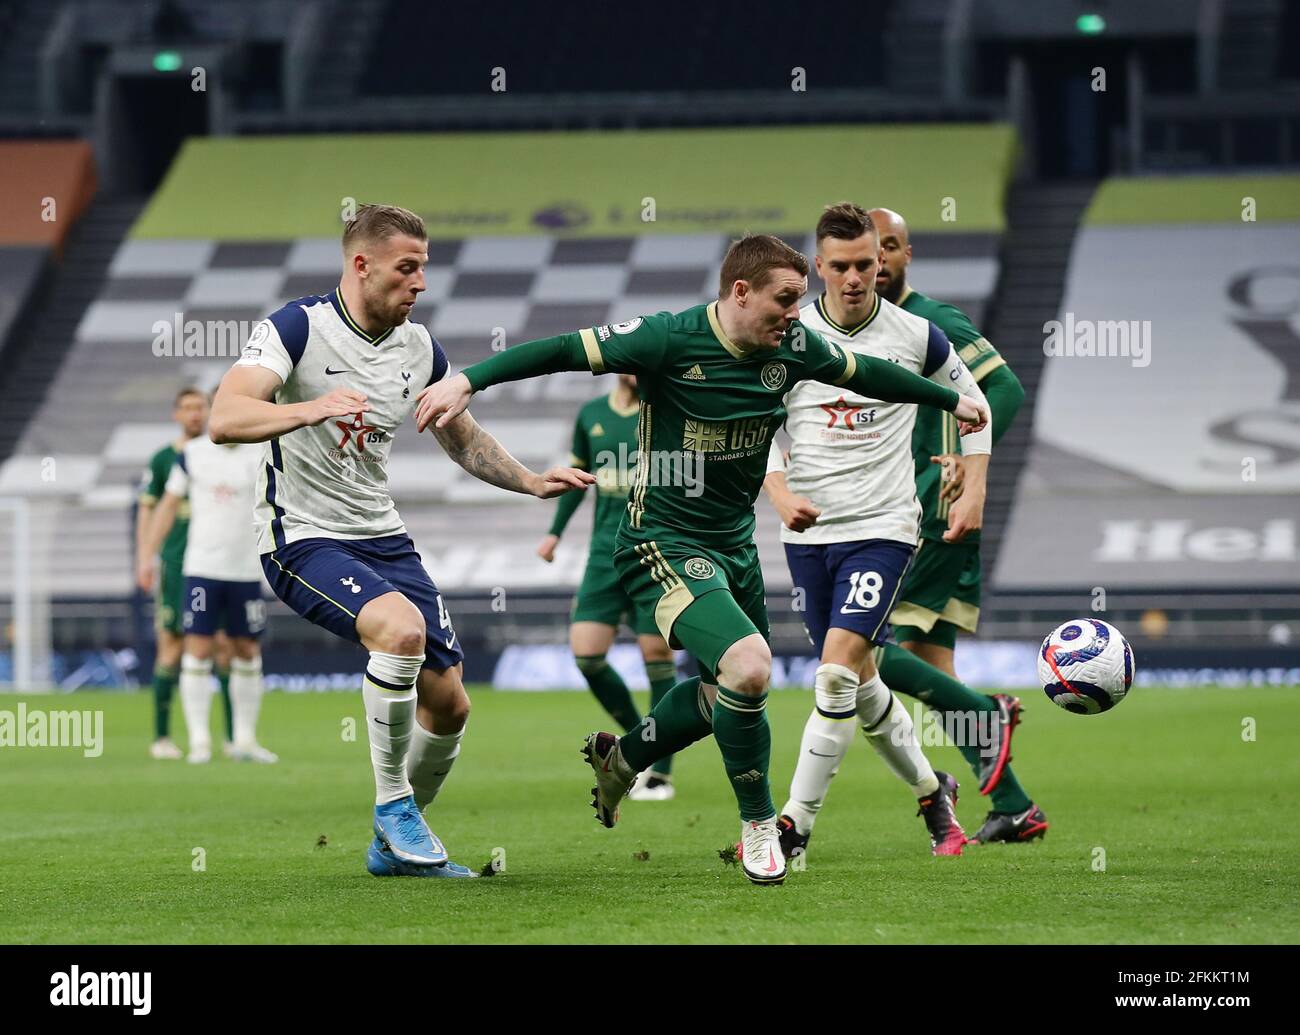 London, England, 2nd May 2021. John Fleck of Sheffield Utd tracked by Toby Alderweireld of Tottenham during the Premier League match at the Tottenham Hotspur Stadium, London. Picture credit should read: David Klein / Sportimage Credit: Sportimage/Alamy Live News Stock Photo